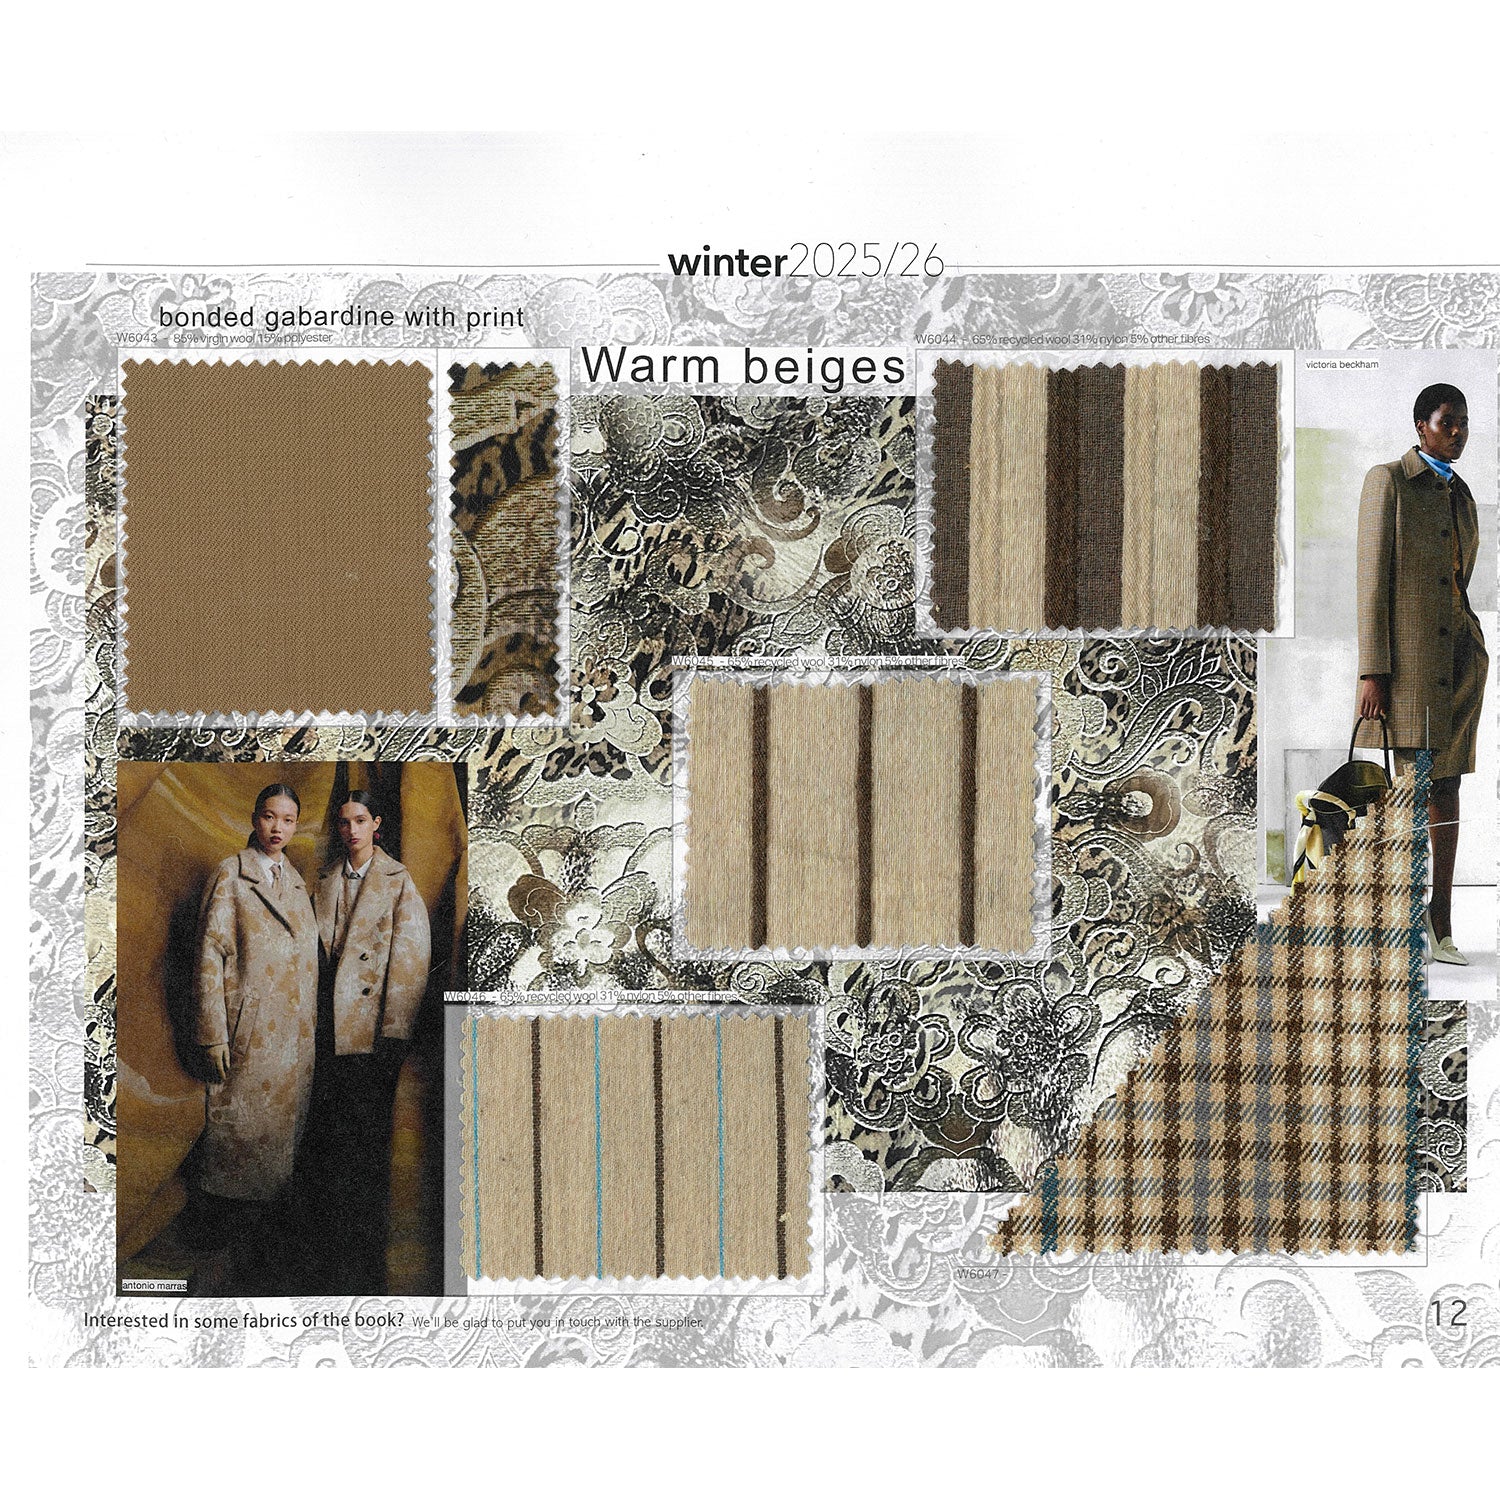 Five fabric swatches for women's coats and jackets in elegant warm beige. One is a wool-based bonded gabardine with printed reverse. One is a textured crinkled stripe. One is a brown thin stripe on a beige ground. One is a beige ground with thin tuquoise and dark brown stripes. One is a classic-style check where beige, white dark brown and blue are combined to create an overcheck on a checquered background